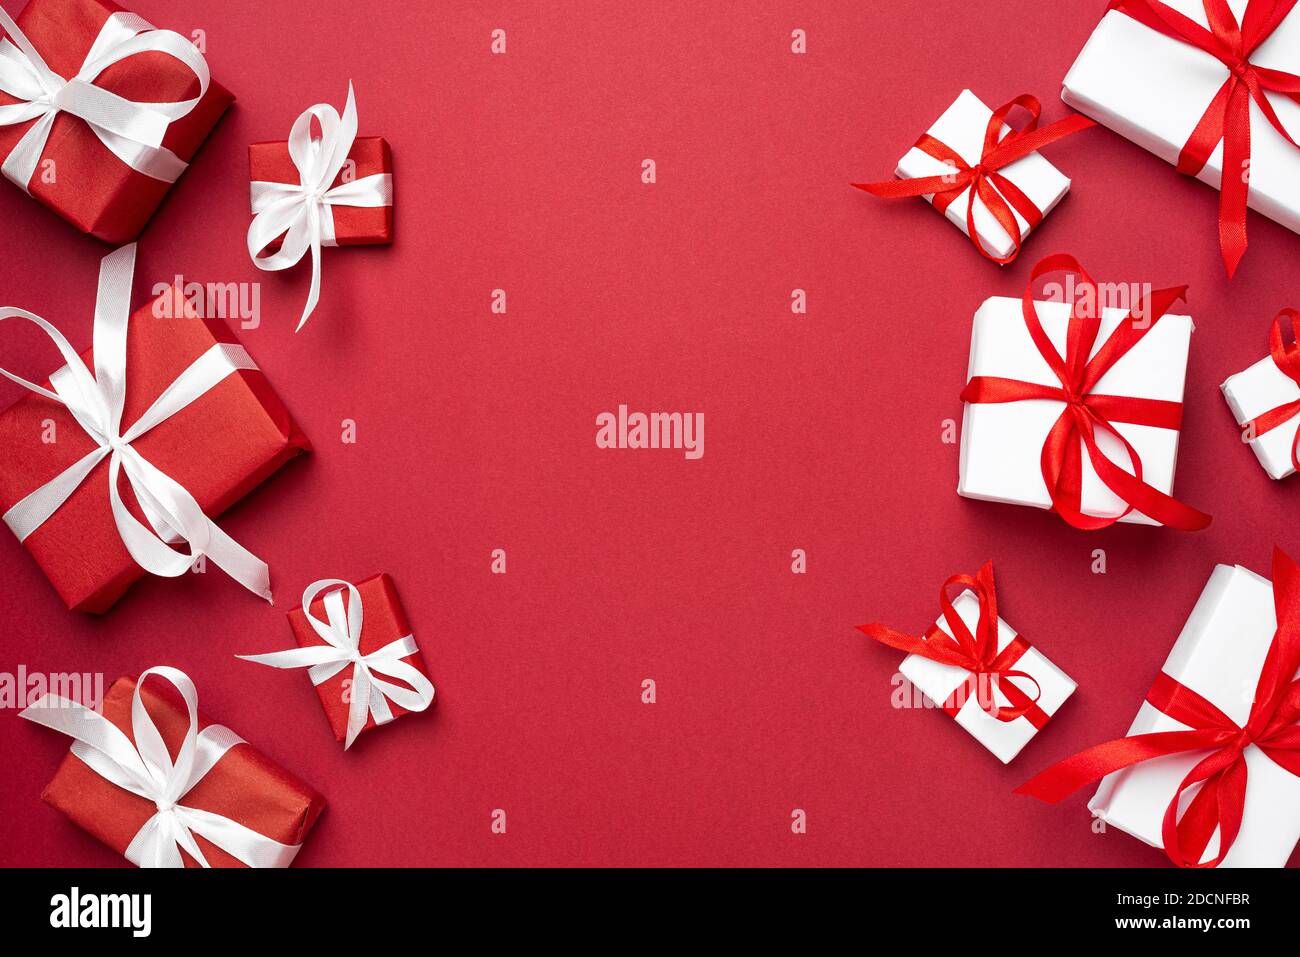 Merry Christmas and Happy Holidays greeting card. New Year. Red and white Christmas gift boxes on red background. top view. Flat lay Stock Photo